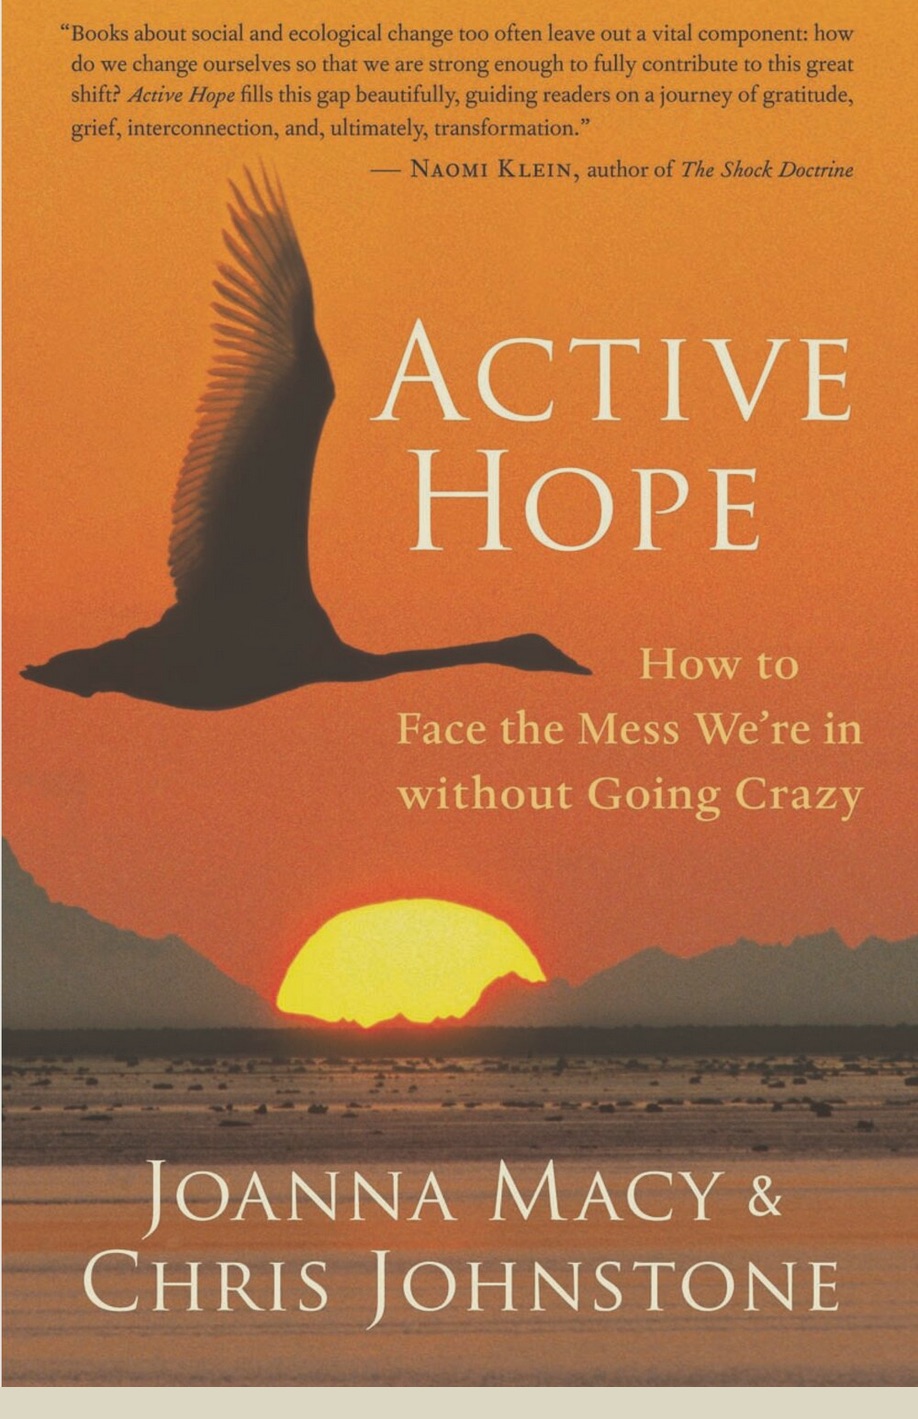 Book: “Active Hope: how to face the mess we’re in without going crazy” by Joanna Macy and Chris Johnstone